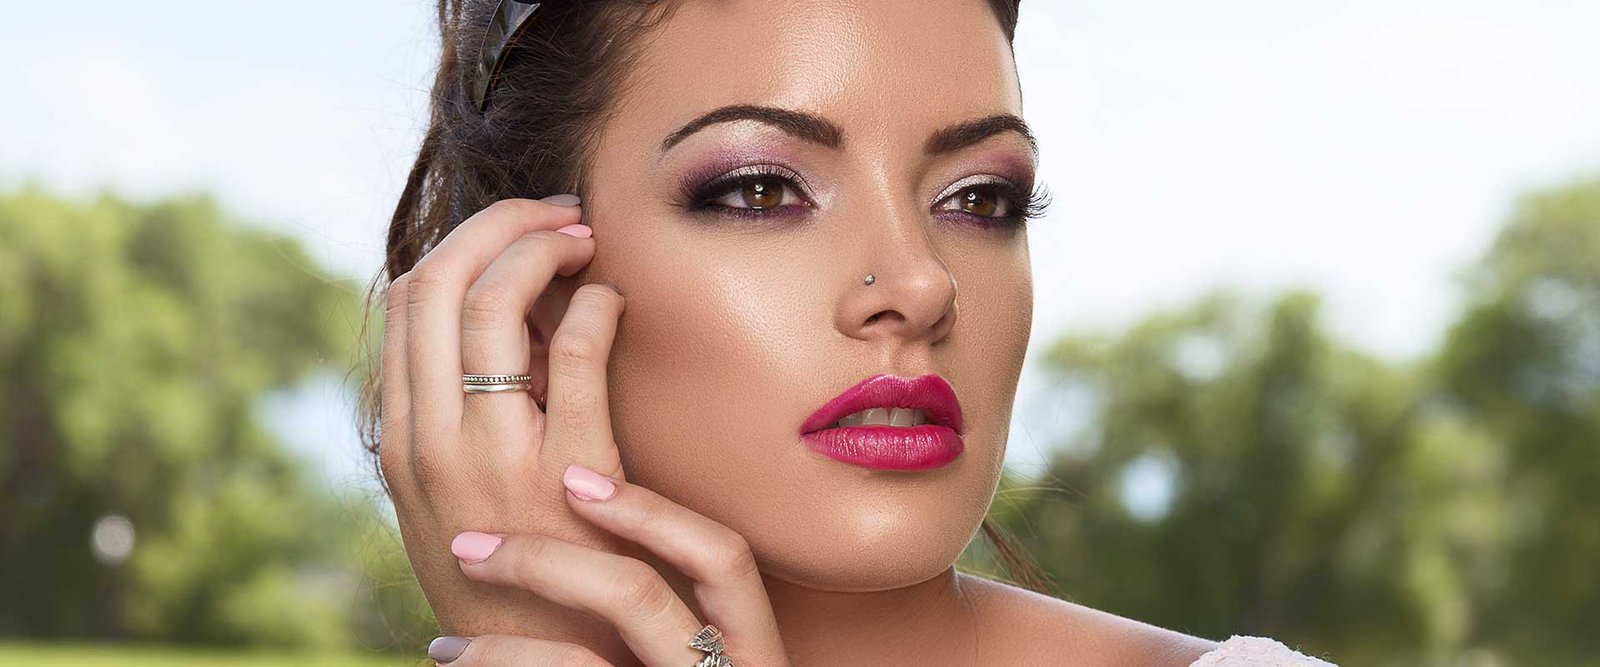 Lifestyle and Beauty Makeup Services - Jean Rose Beauty